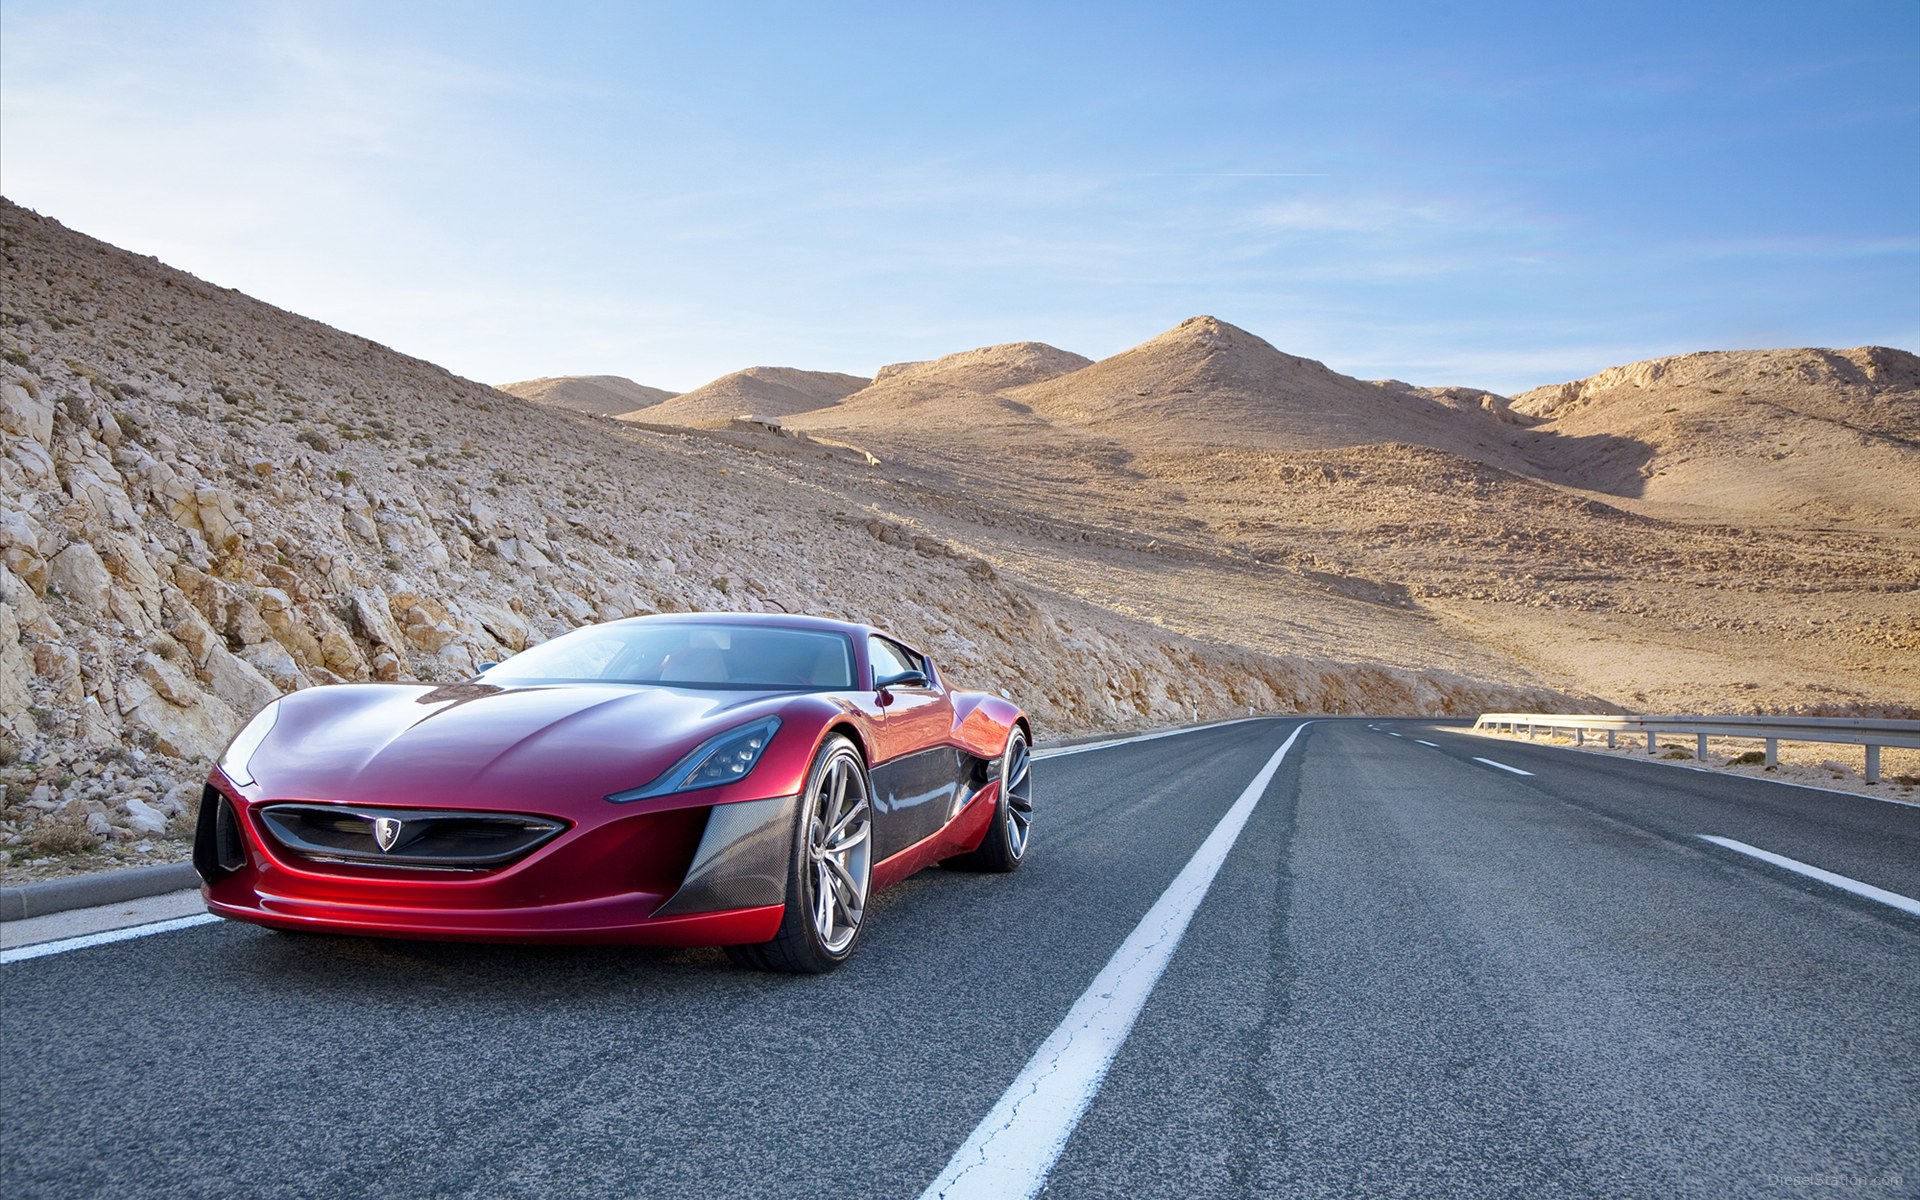 Rimac Concept One Widescreen Exotic Car Picture